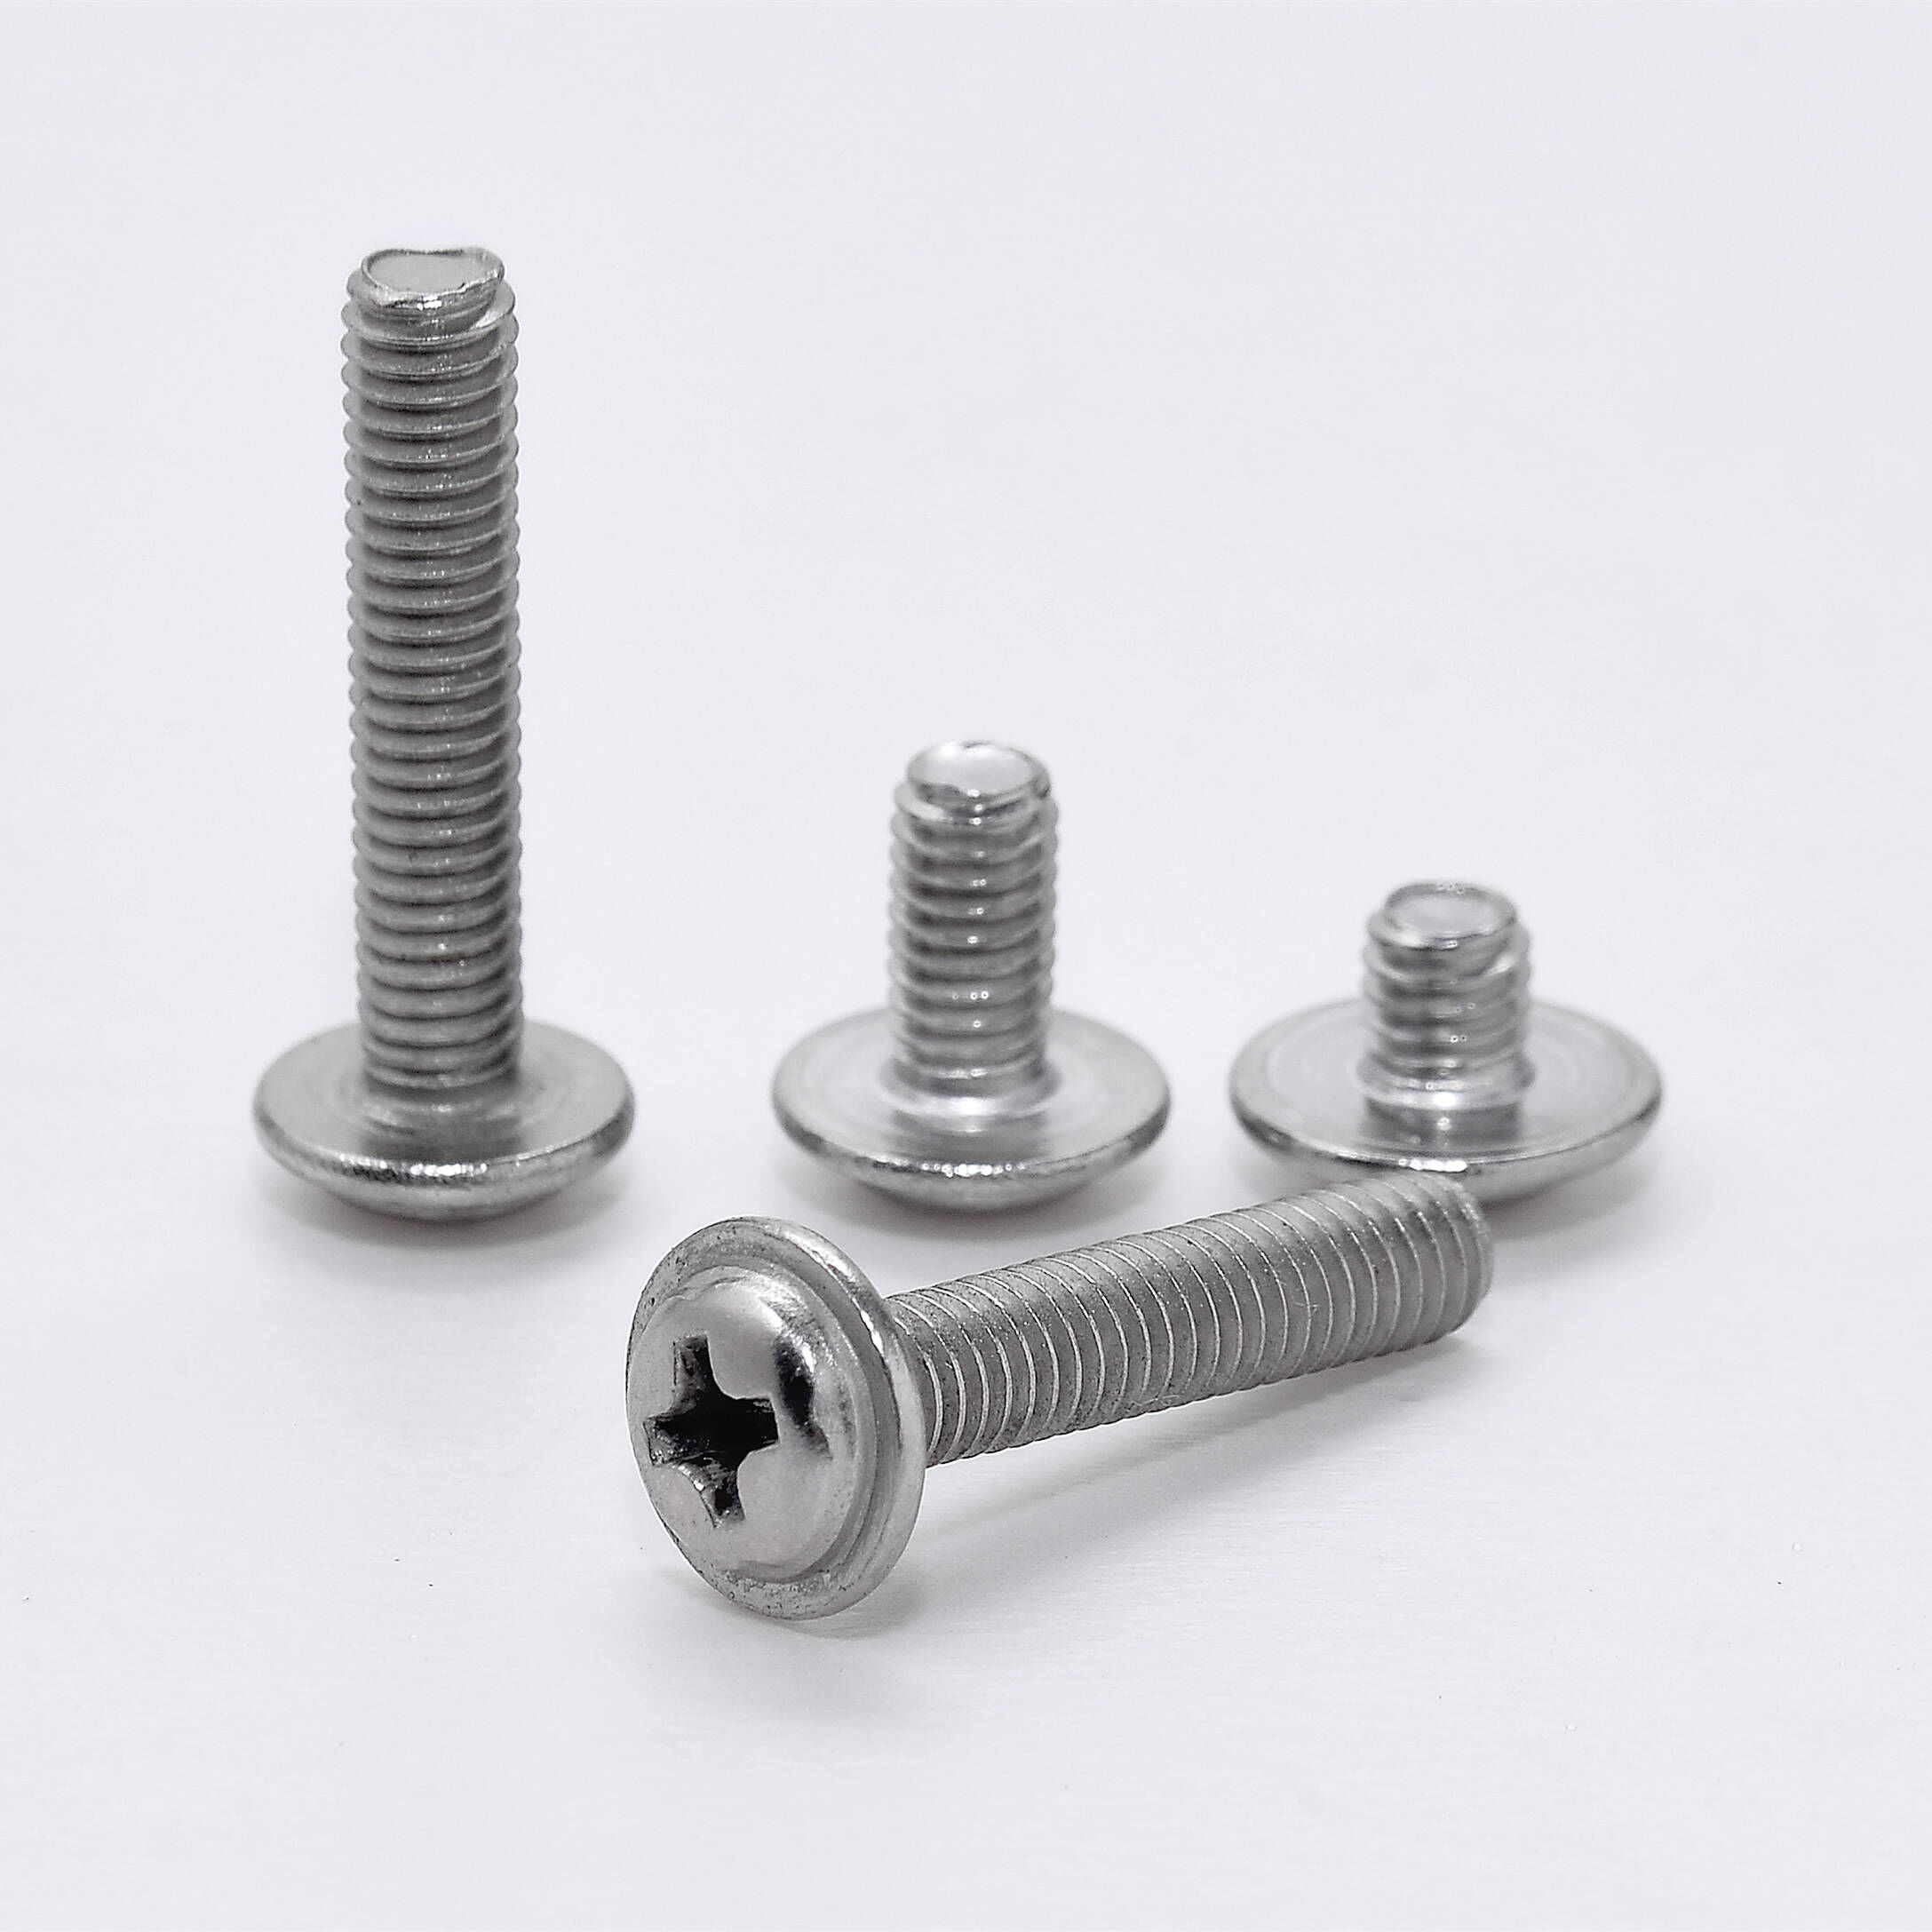 M1 M1.2 M1.4 M1.6 M2 Stainless Steel Phillips Countersunk Flat Head Small  Screws